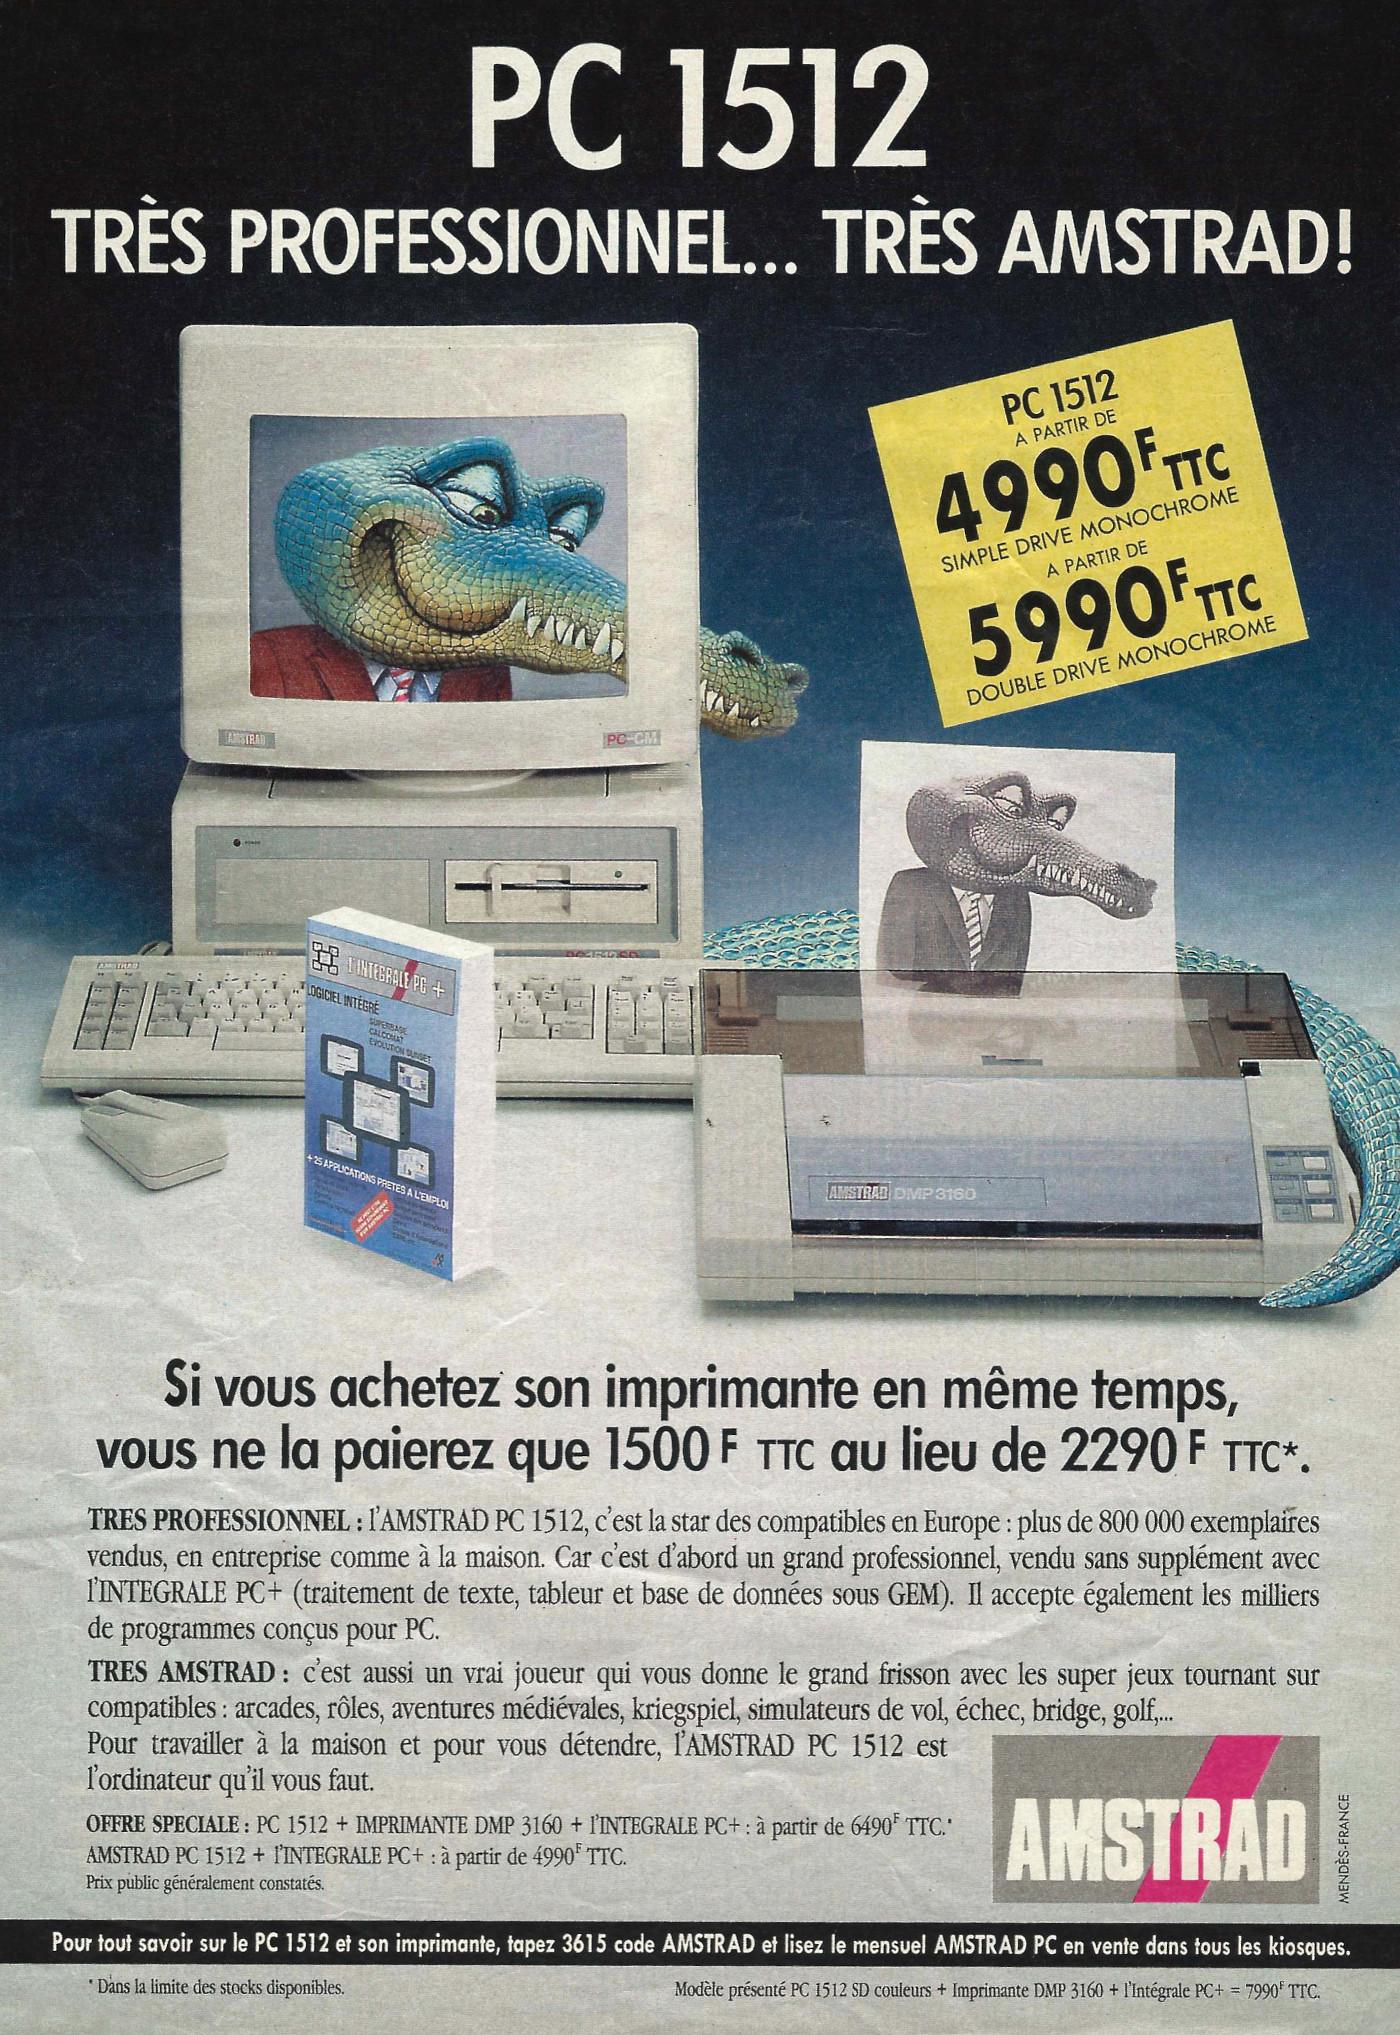 An Amstrad advert placed in a French magazine, showing the PC 1512 in a bundle offer with a printer f<span class='hilite'>or</span> 1500F instead of 2290F, which is about a £79 discount, <span class='hilite'>or</span> £250 in 2024. The advert also claims that m<span class='hilite'>or</span>e than 800,000 1512s had been sold to businesses and home users.